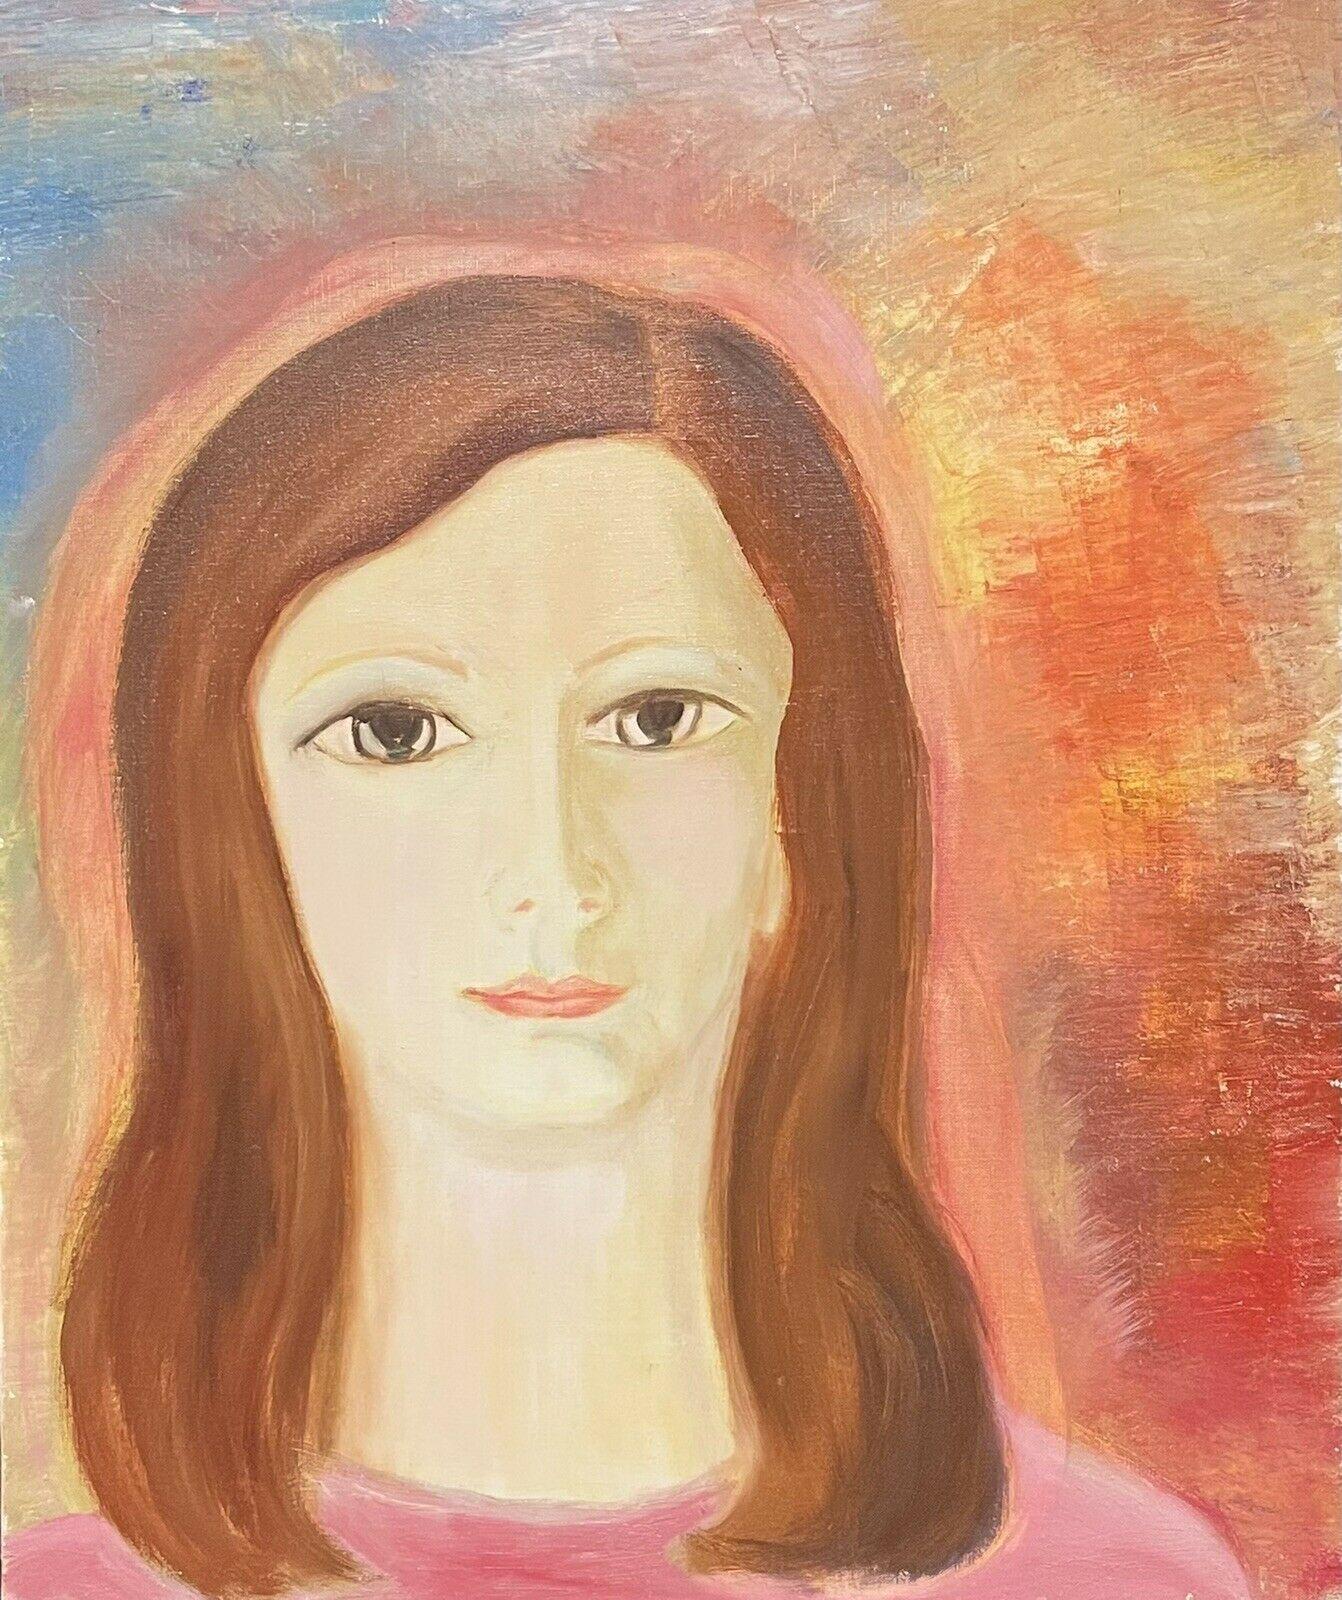 1970's FRENCH OIL PAINTING - HEAD & SHOULDERS PORTRAIT YOUNG LADY PINK & ORANGE